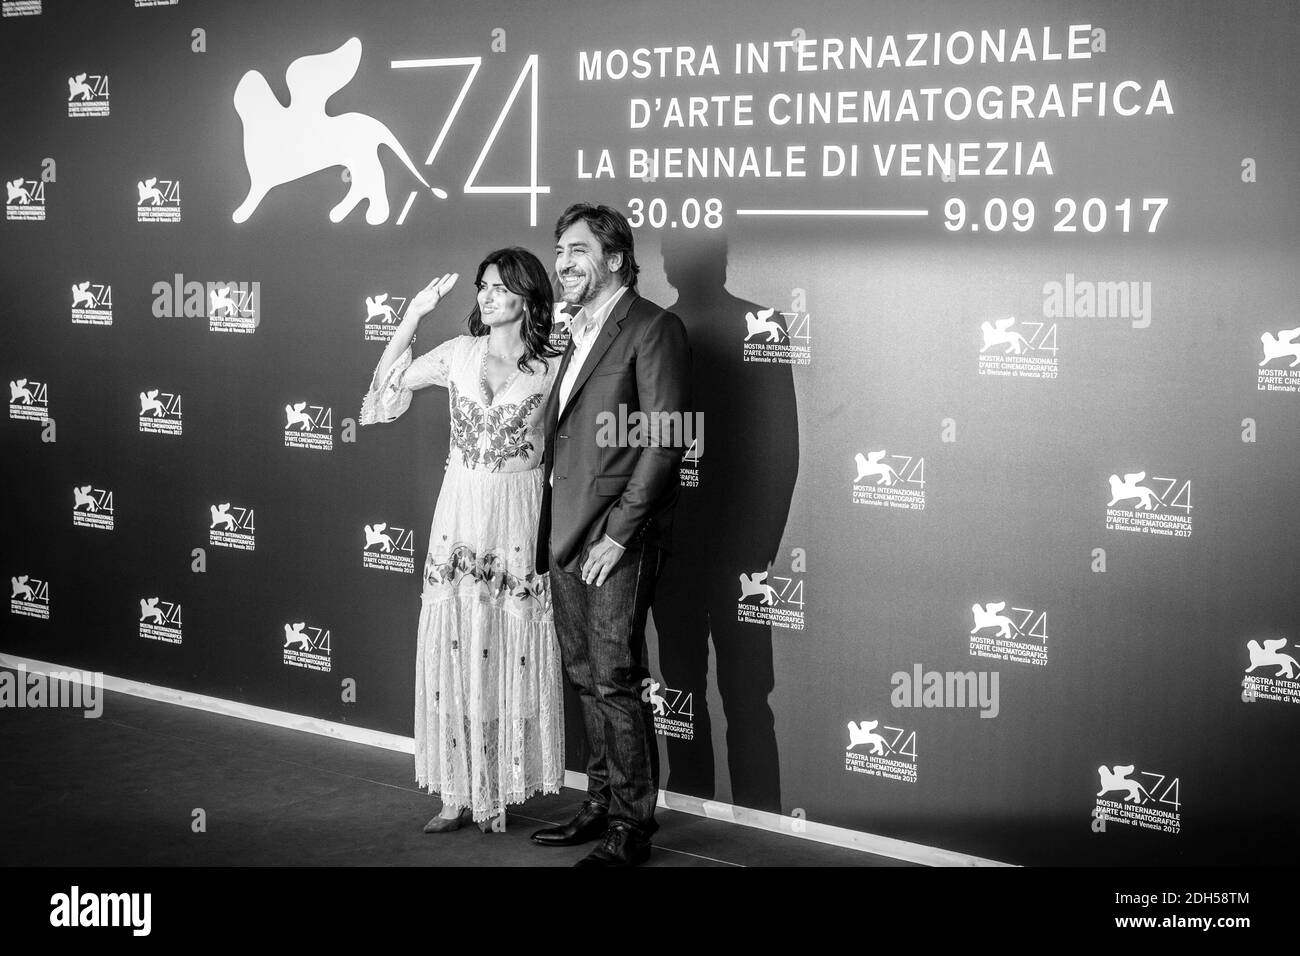 Javier Bardem, Penelope Cruz pose during the photocall of the movie 'Loving Pablo' at the 74th International Film Festival of Venice (Mostra), Venice, on september 6, 2017. Photo by Marco Piovanotto/ABACAPRESS.COM Stock Photo